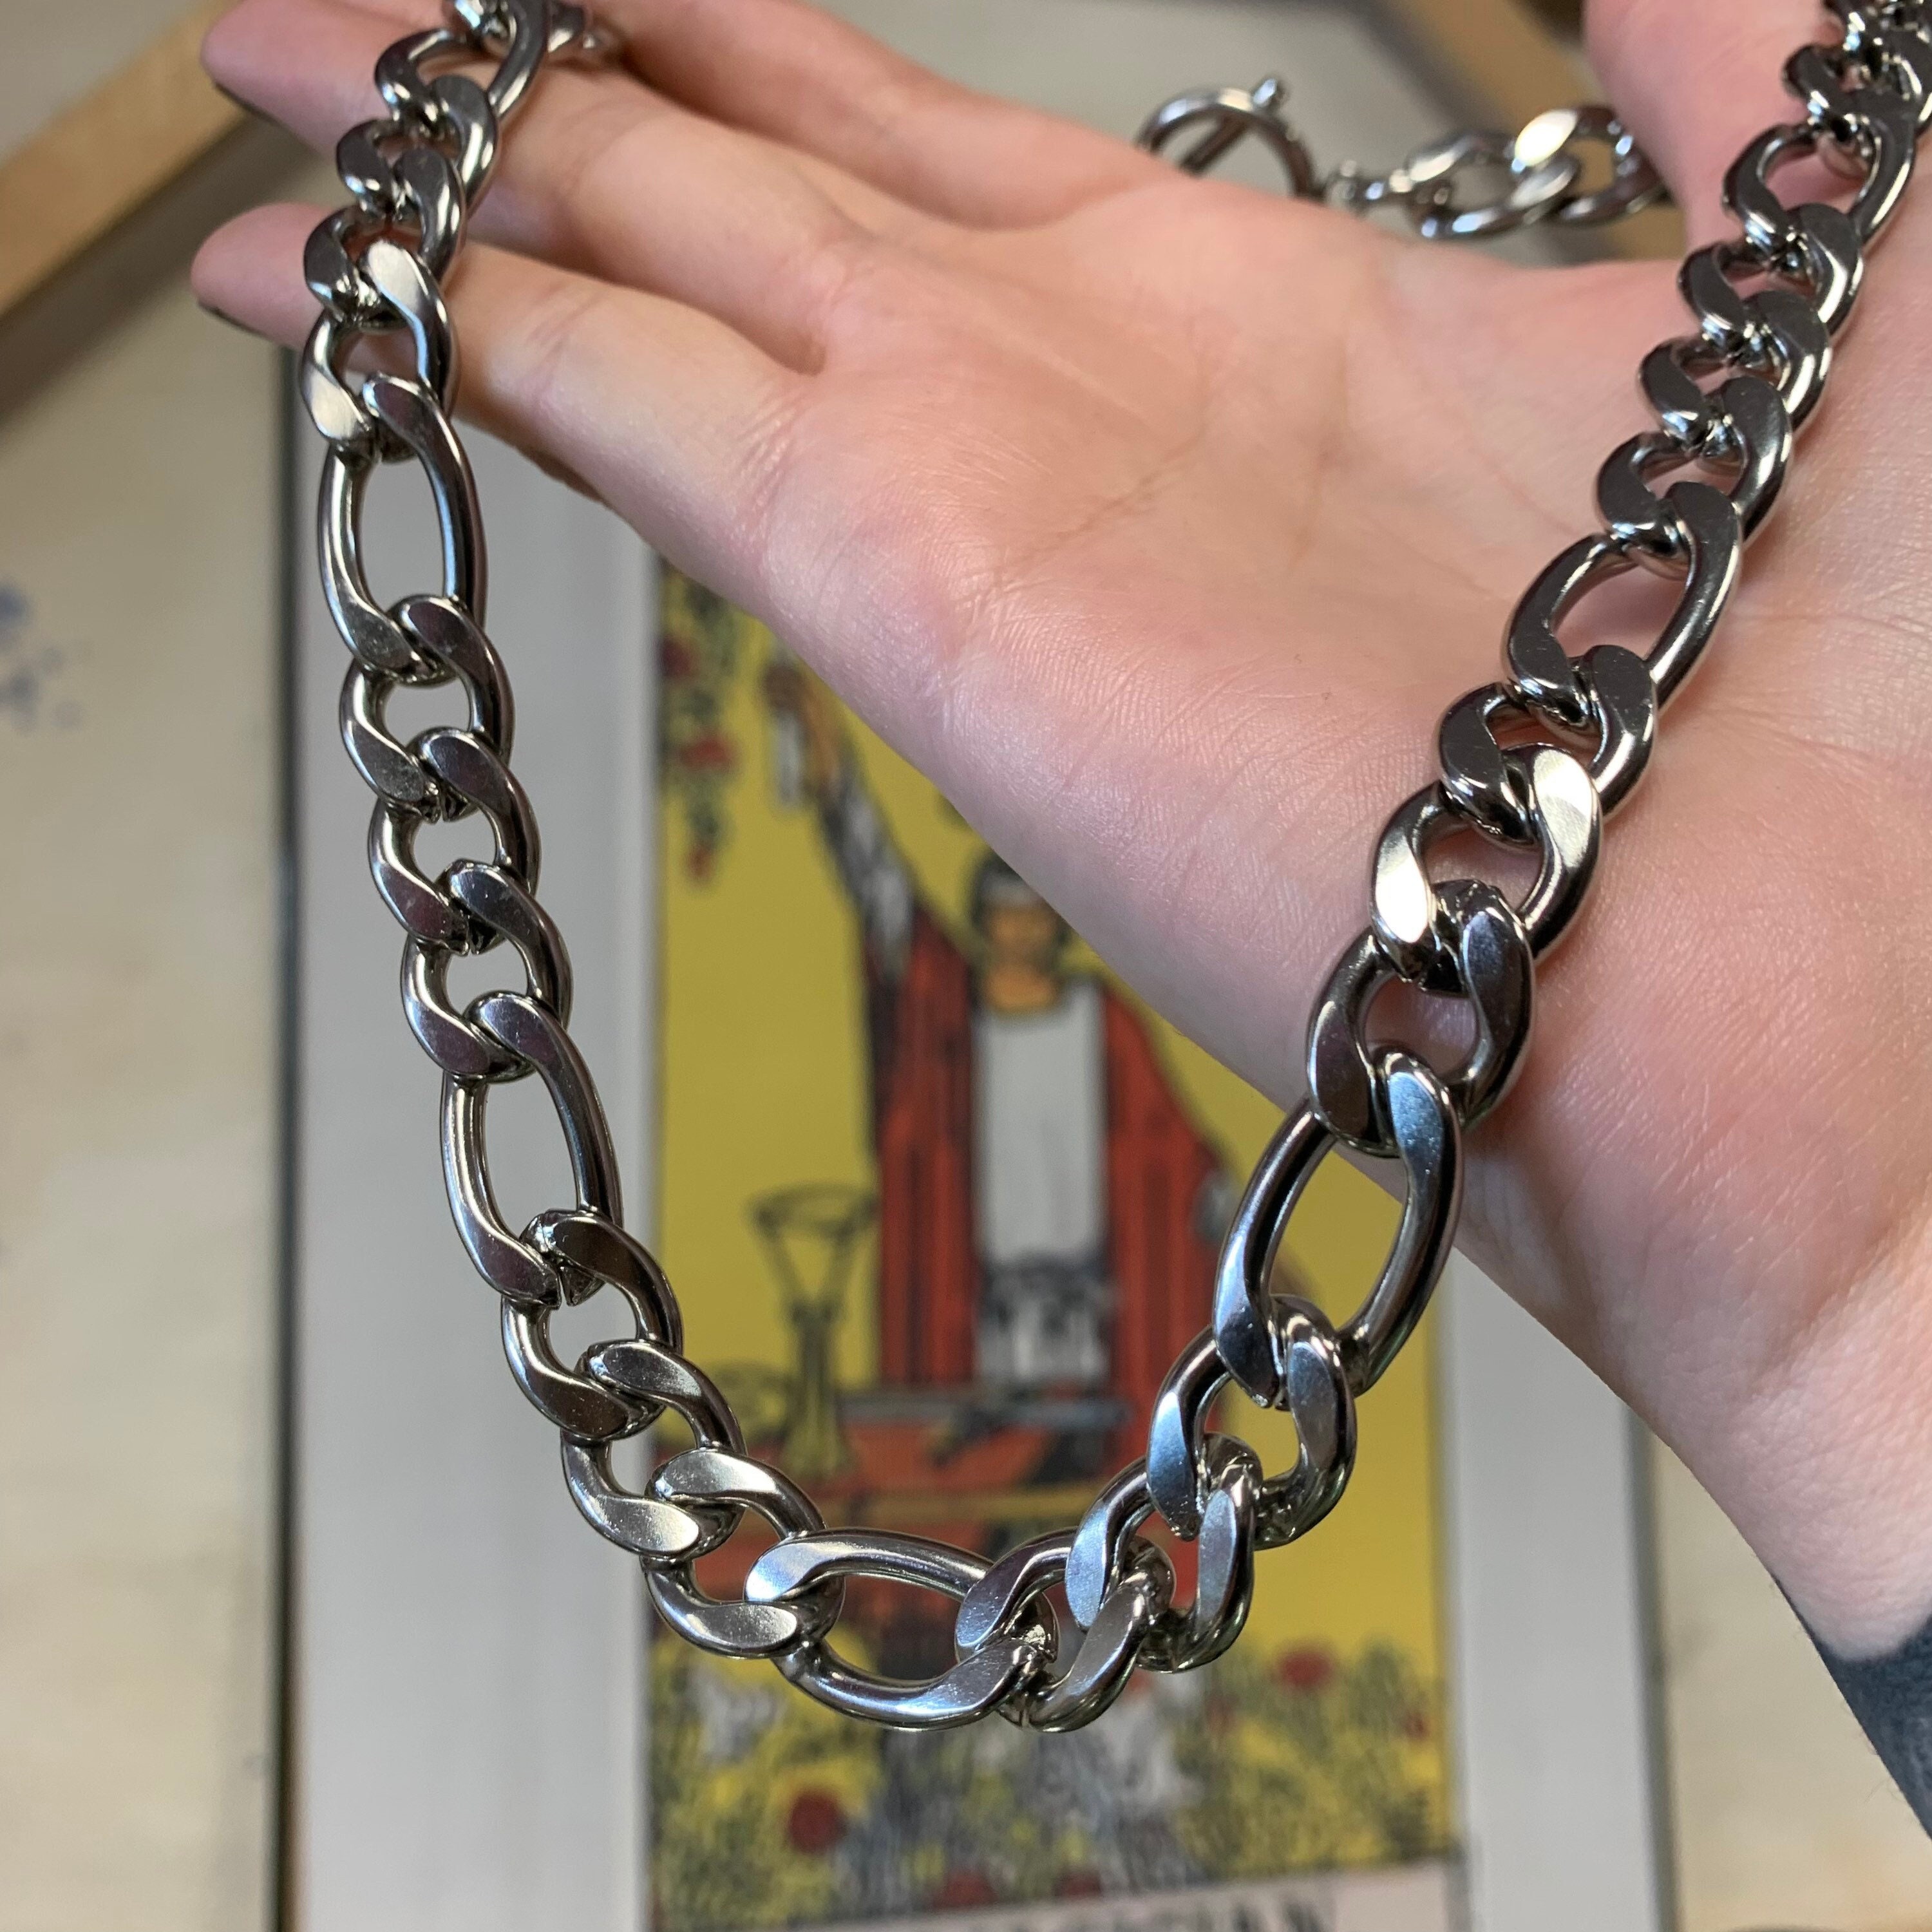 Premium Side Pant Chain,High Quality Glossy Chain (For Unisex) Stainless  Steel Chain Price in India - Buy Premium Side Pant Chain,High Quality  Glossy Chain (For Unisex) Stainless Steel Chain Online at Best